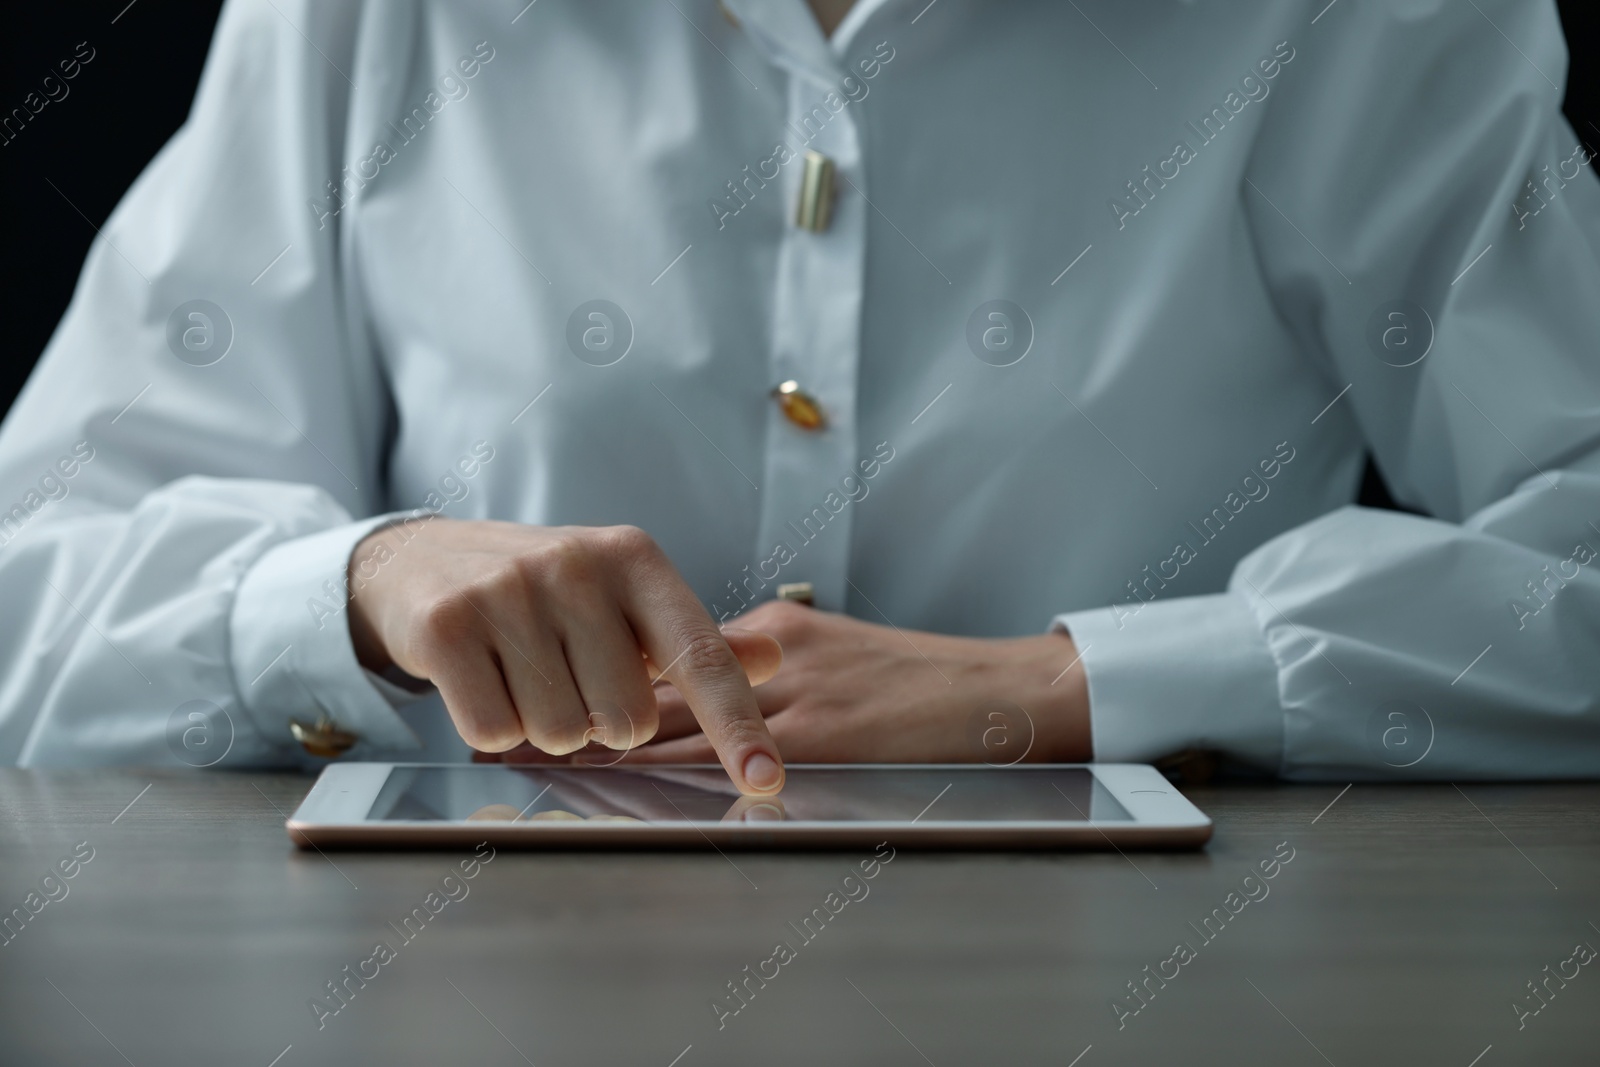 Photo of Closeup view of woman using modern tablet at table on dark background